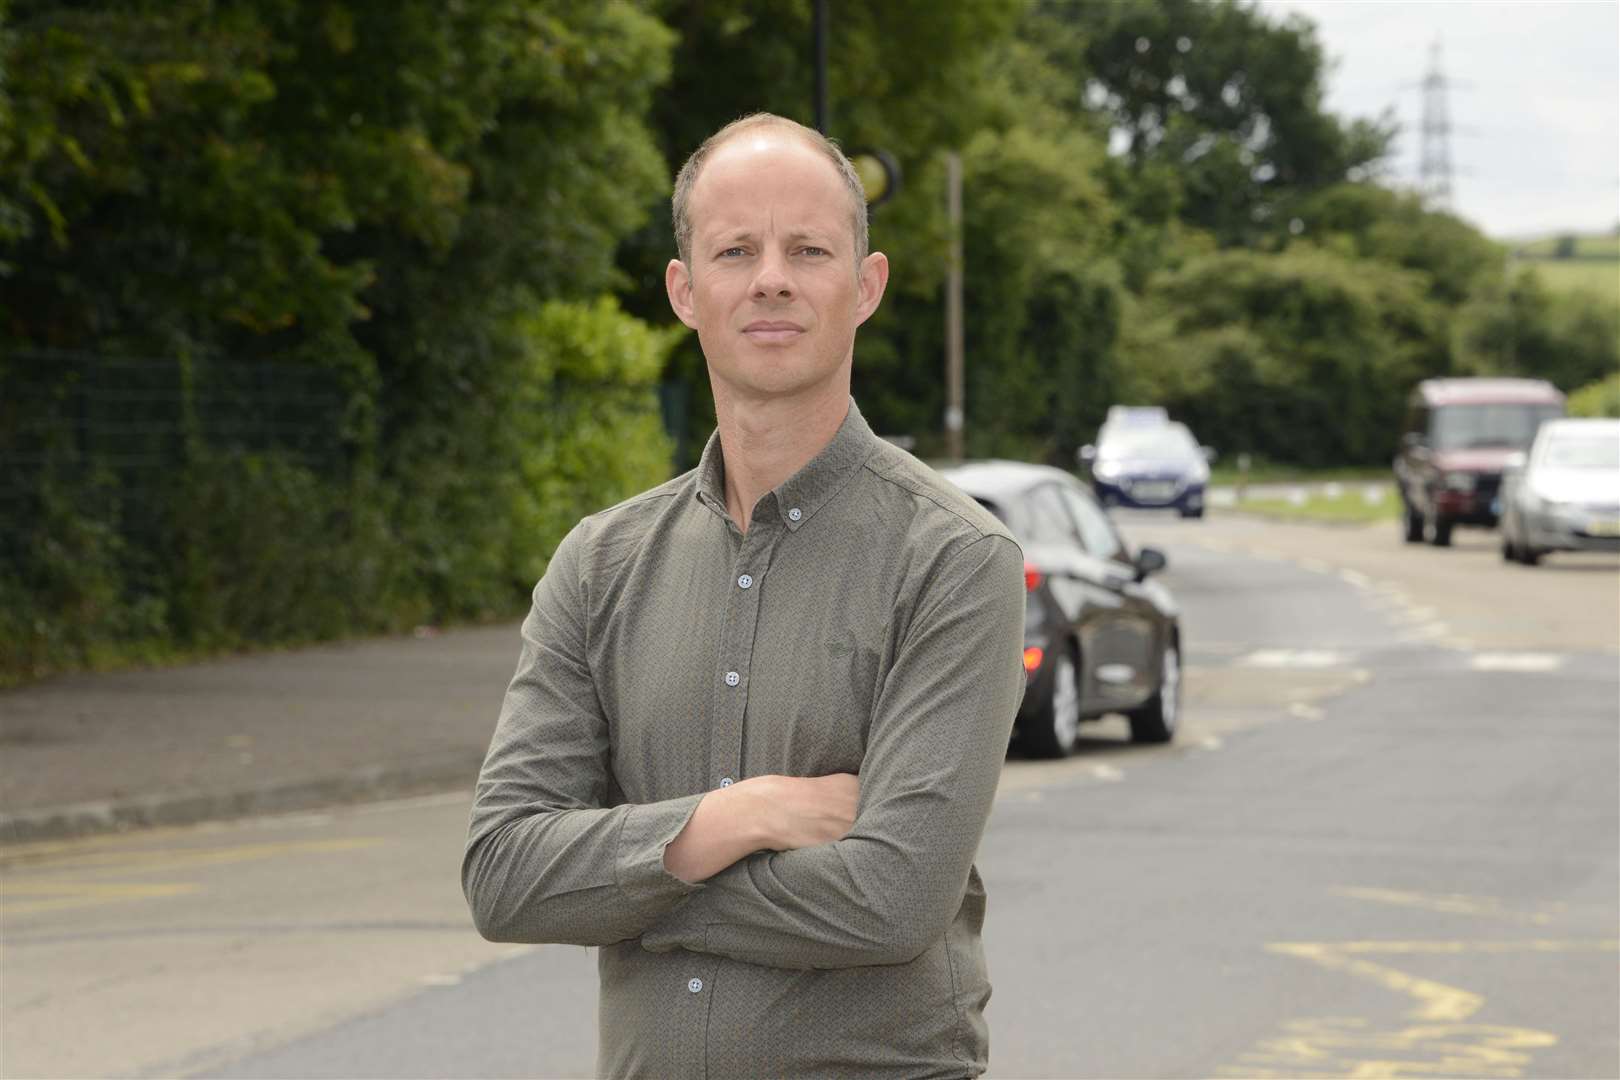 Cllr Dan Watkins has long called for safety improvements